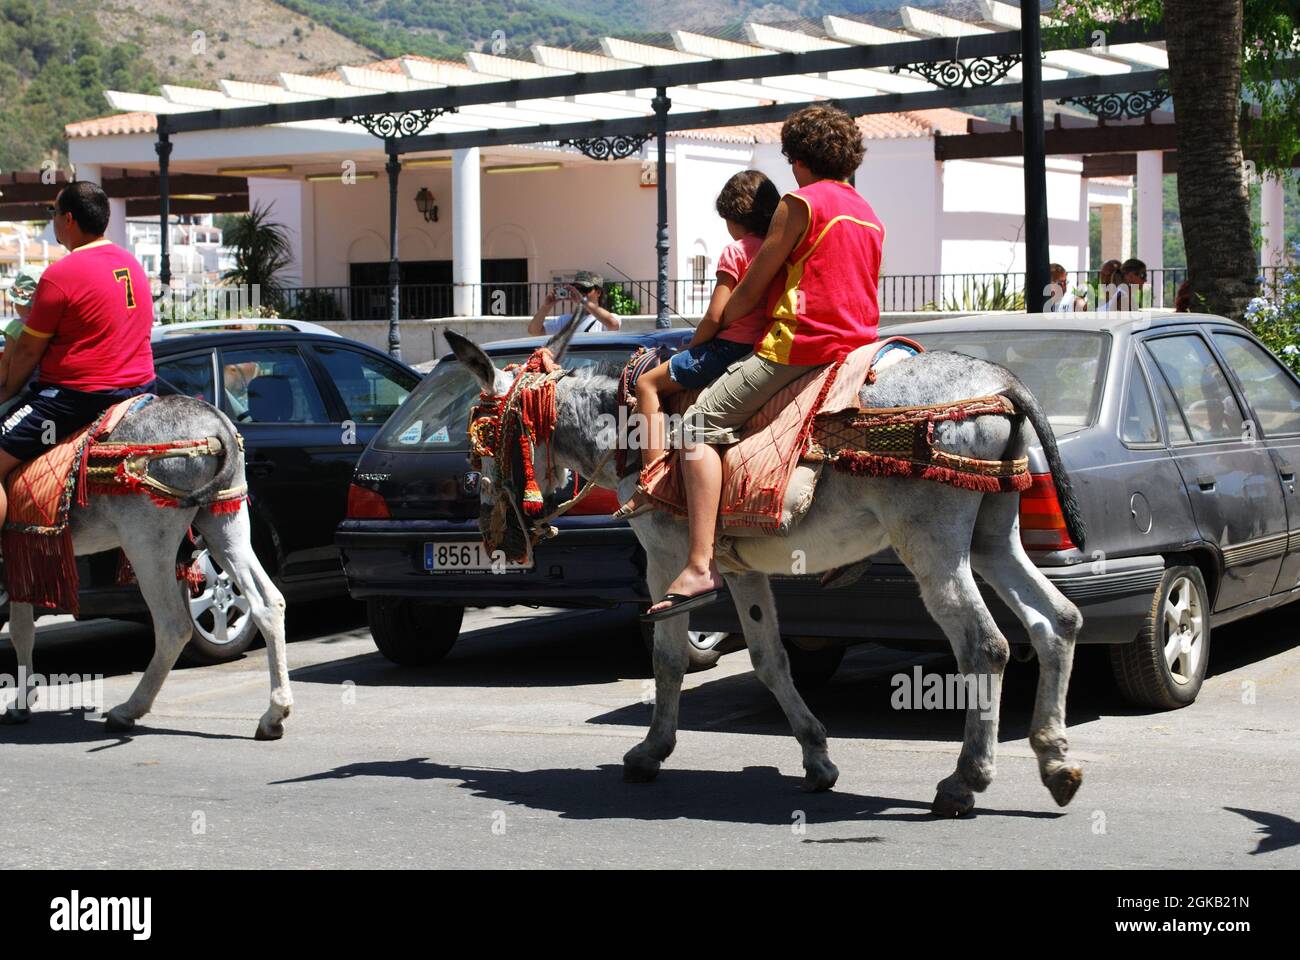 Child taking a donkey ride in the town centre, Burro Taxi, Mijas, Spain. Stock Photo